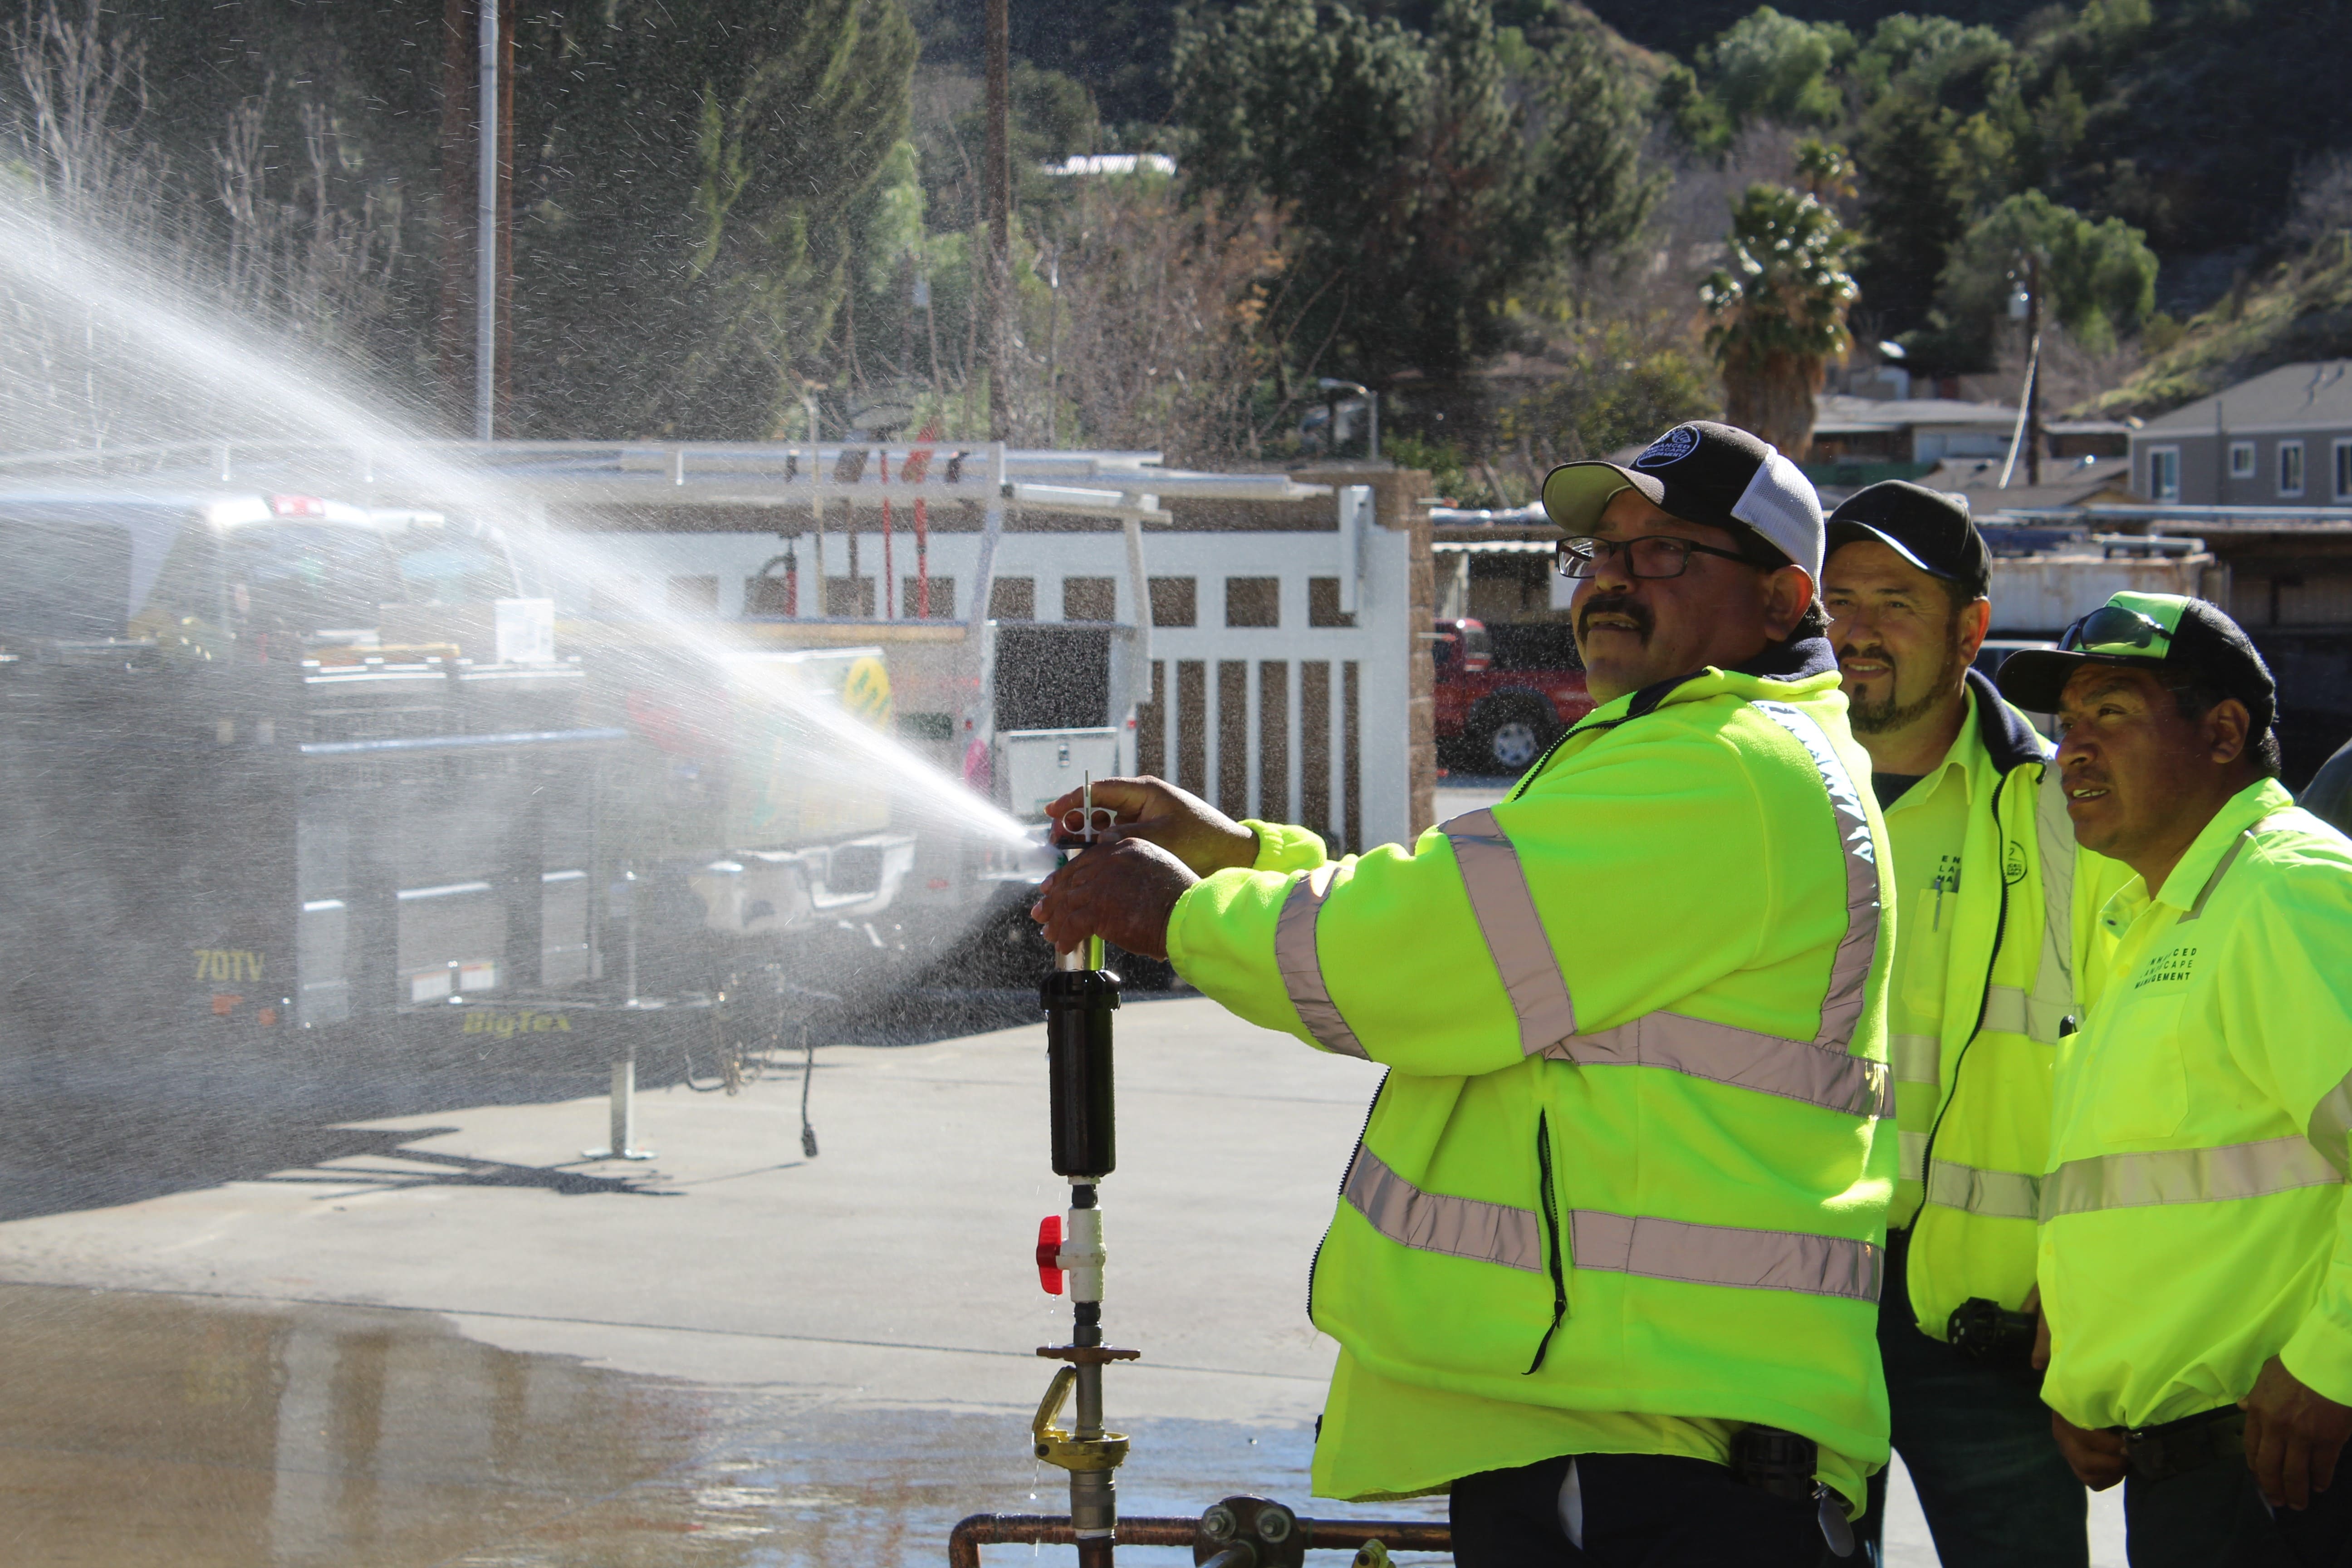 4 Ways to Specialize in Sprinkler System Contracting